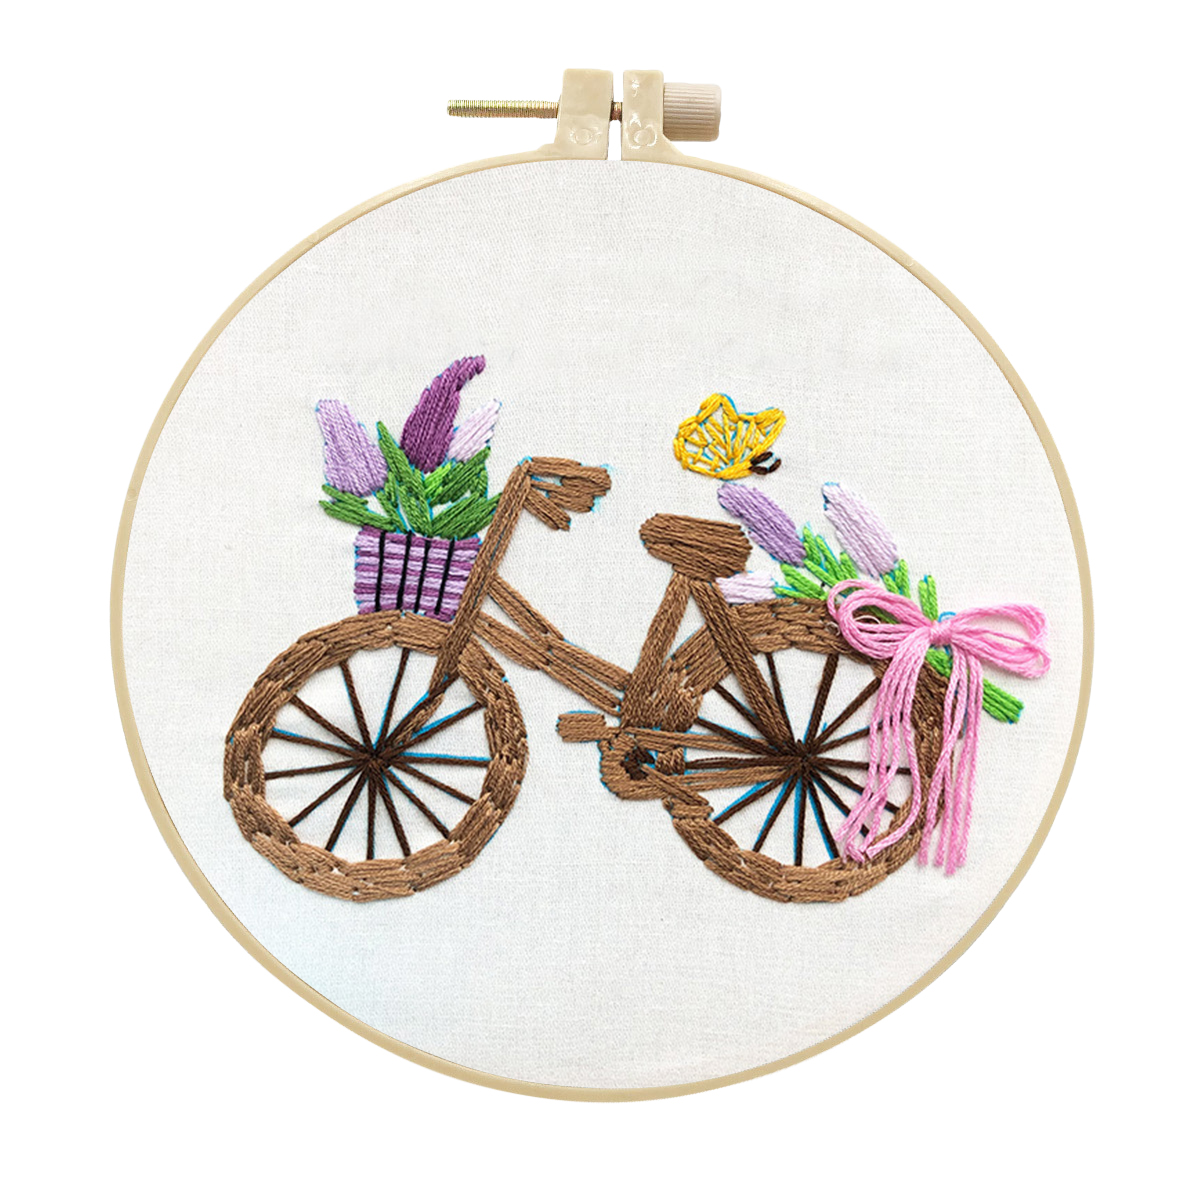 DIY Craft Handmade Embroidery kit for Adult - Bicycle and Lavender Pattern